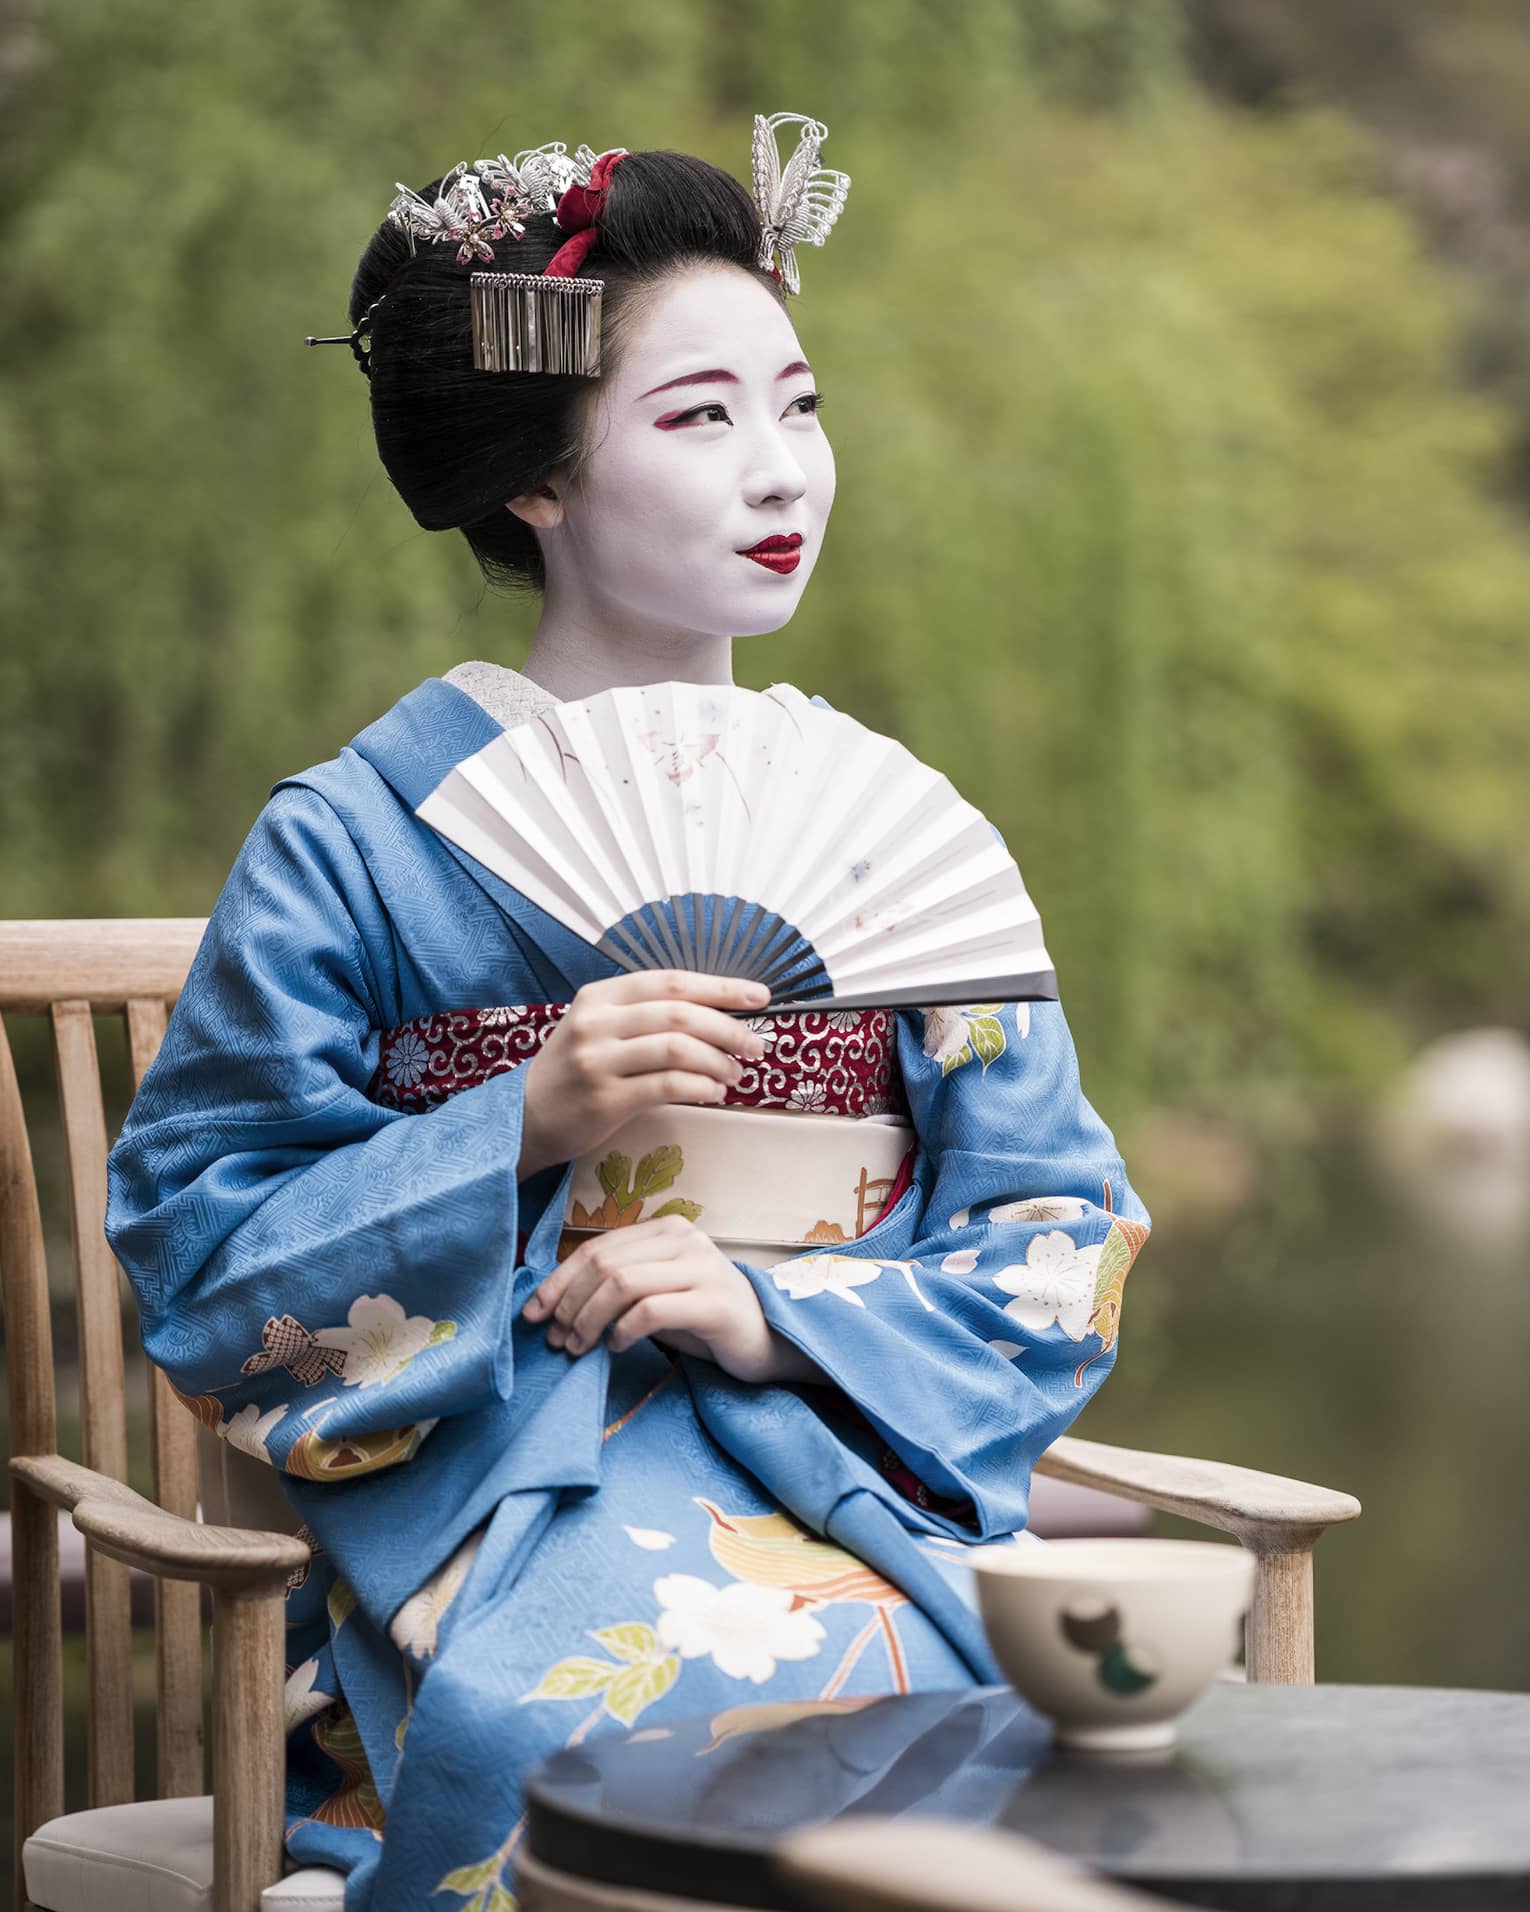 Geiko, a traditional Japanese entertainer, dressed in kimono and holding fan, sitting with cup of tea in garden